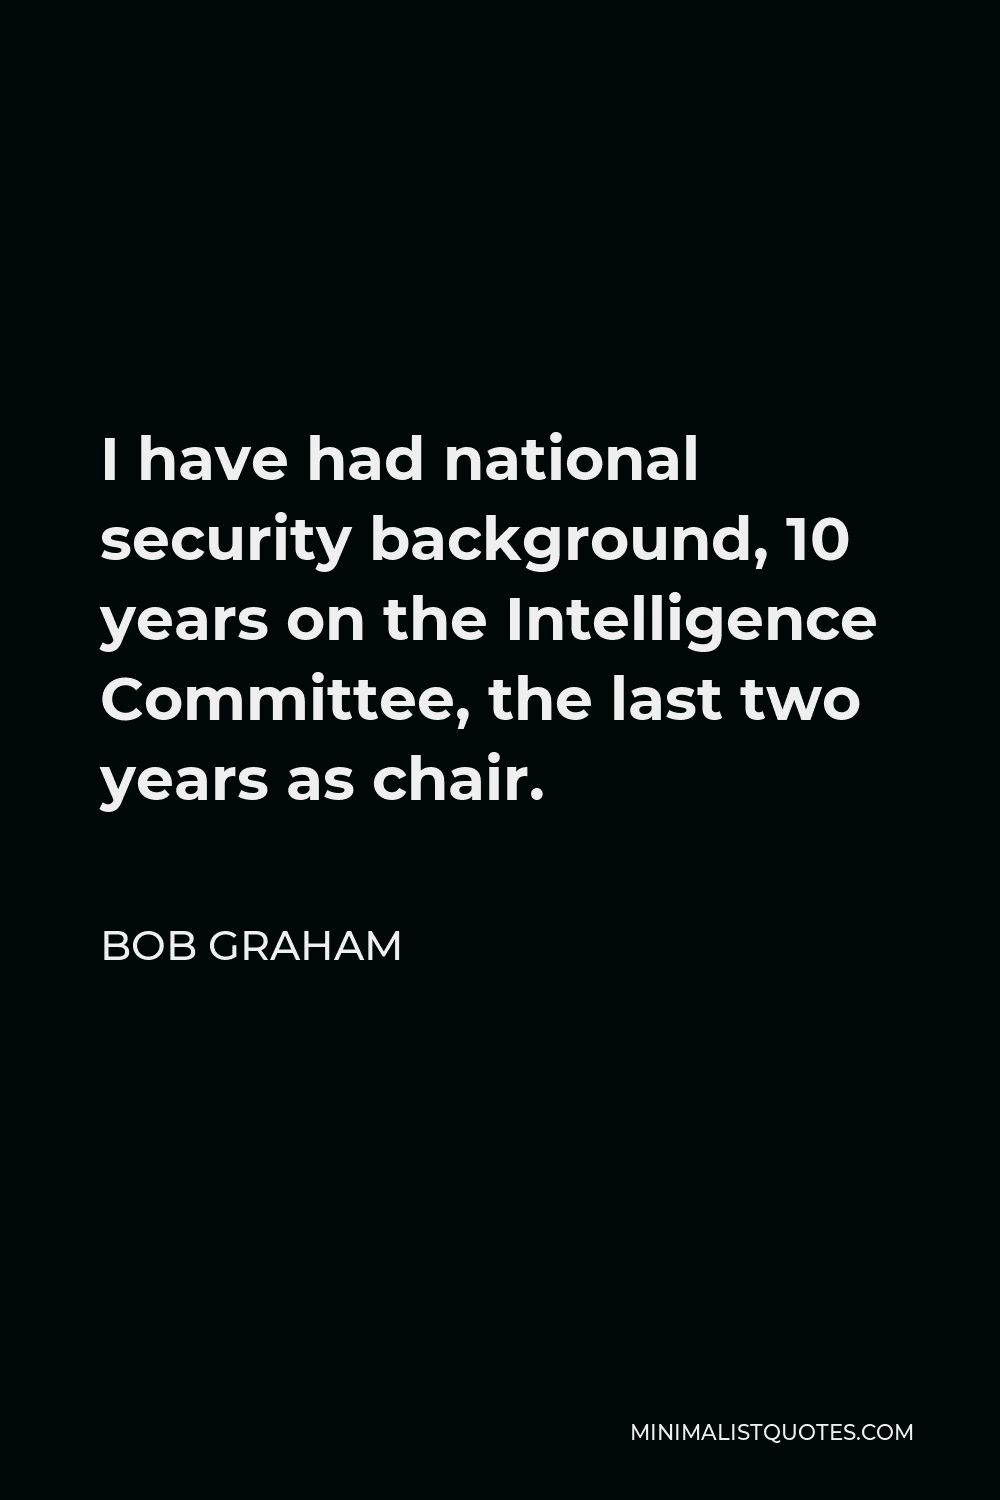 Bob Graham Quote - I have had national security background, 10 years on the Intelligence Committee, the last two years as chair.